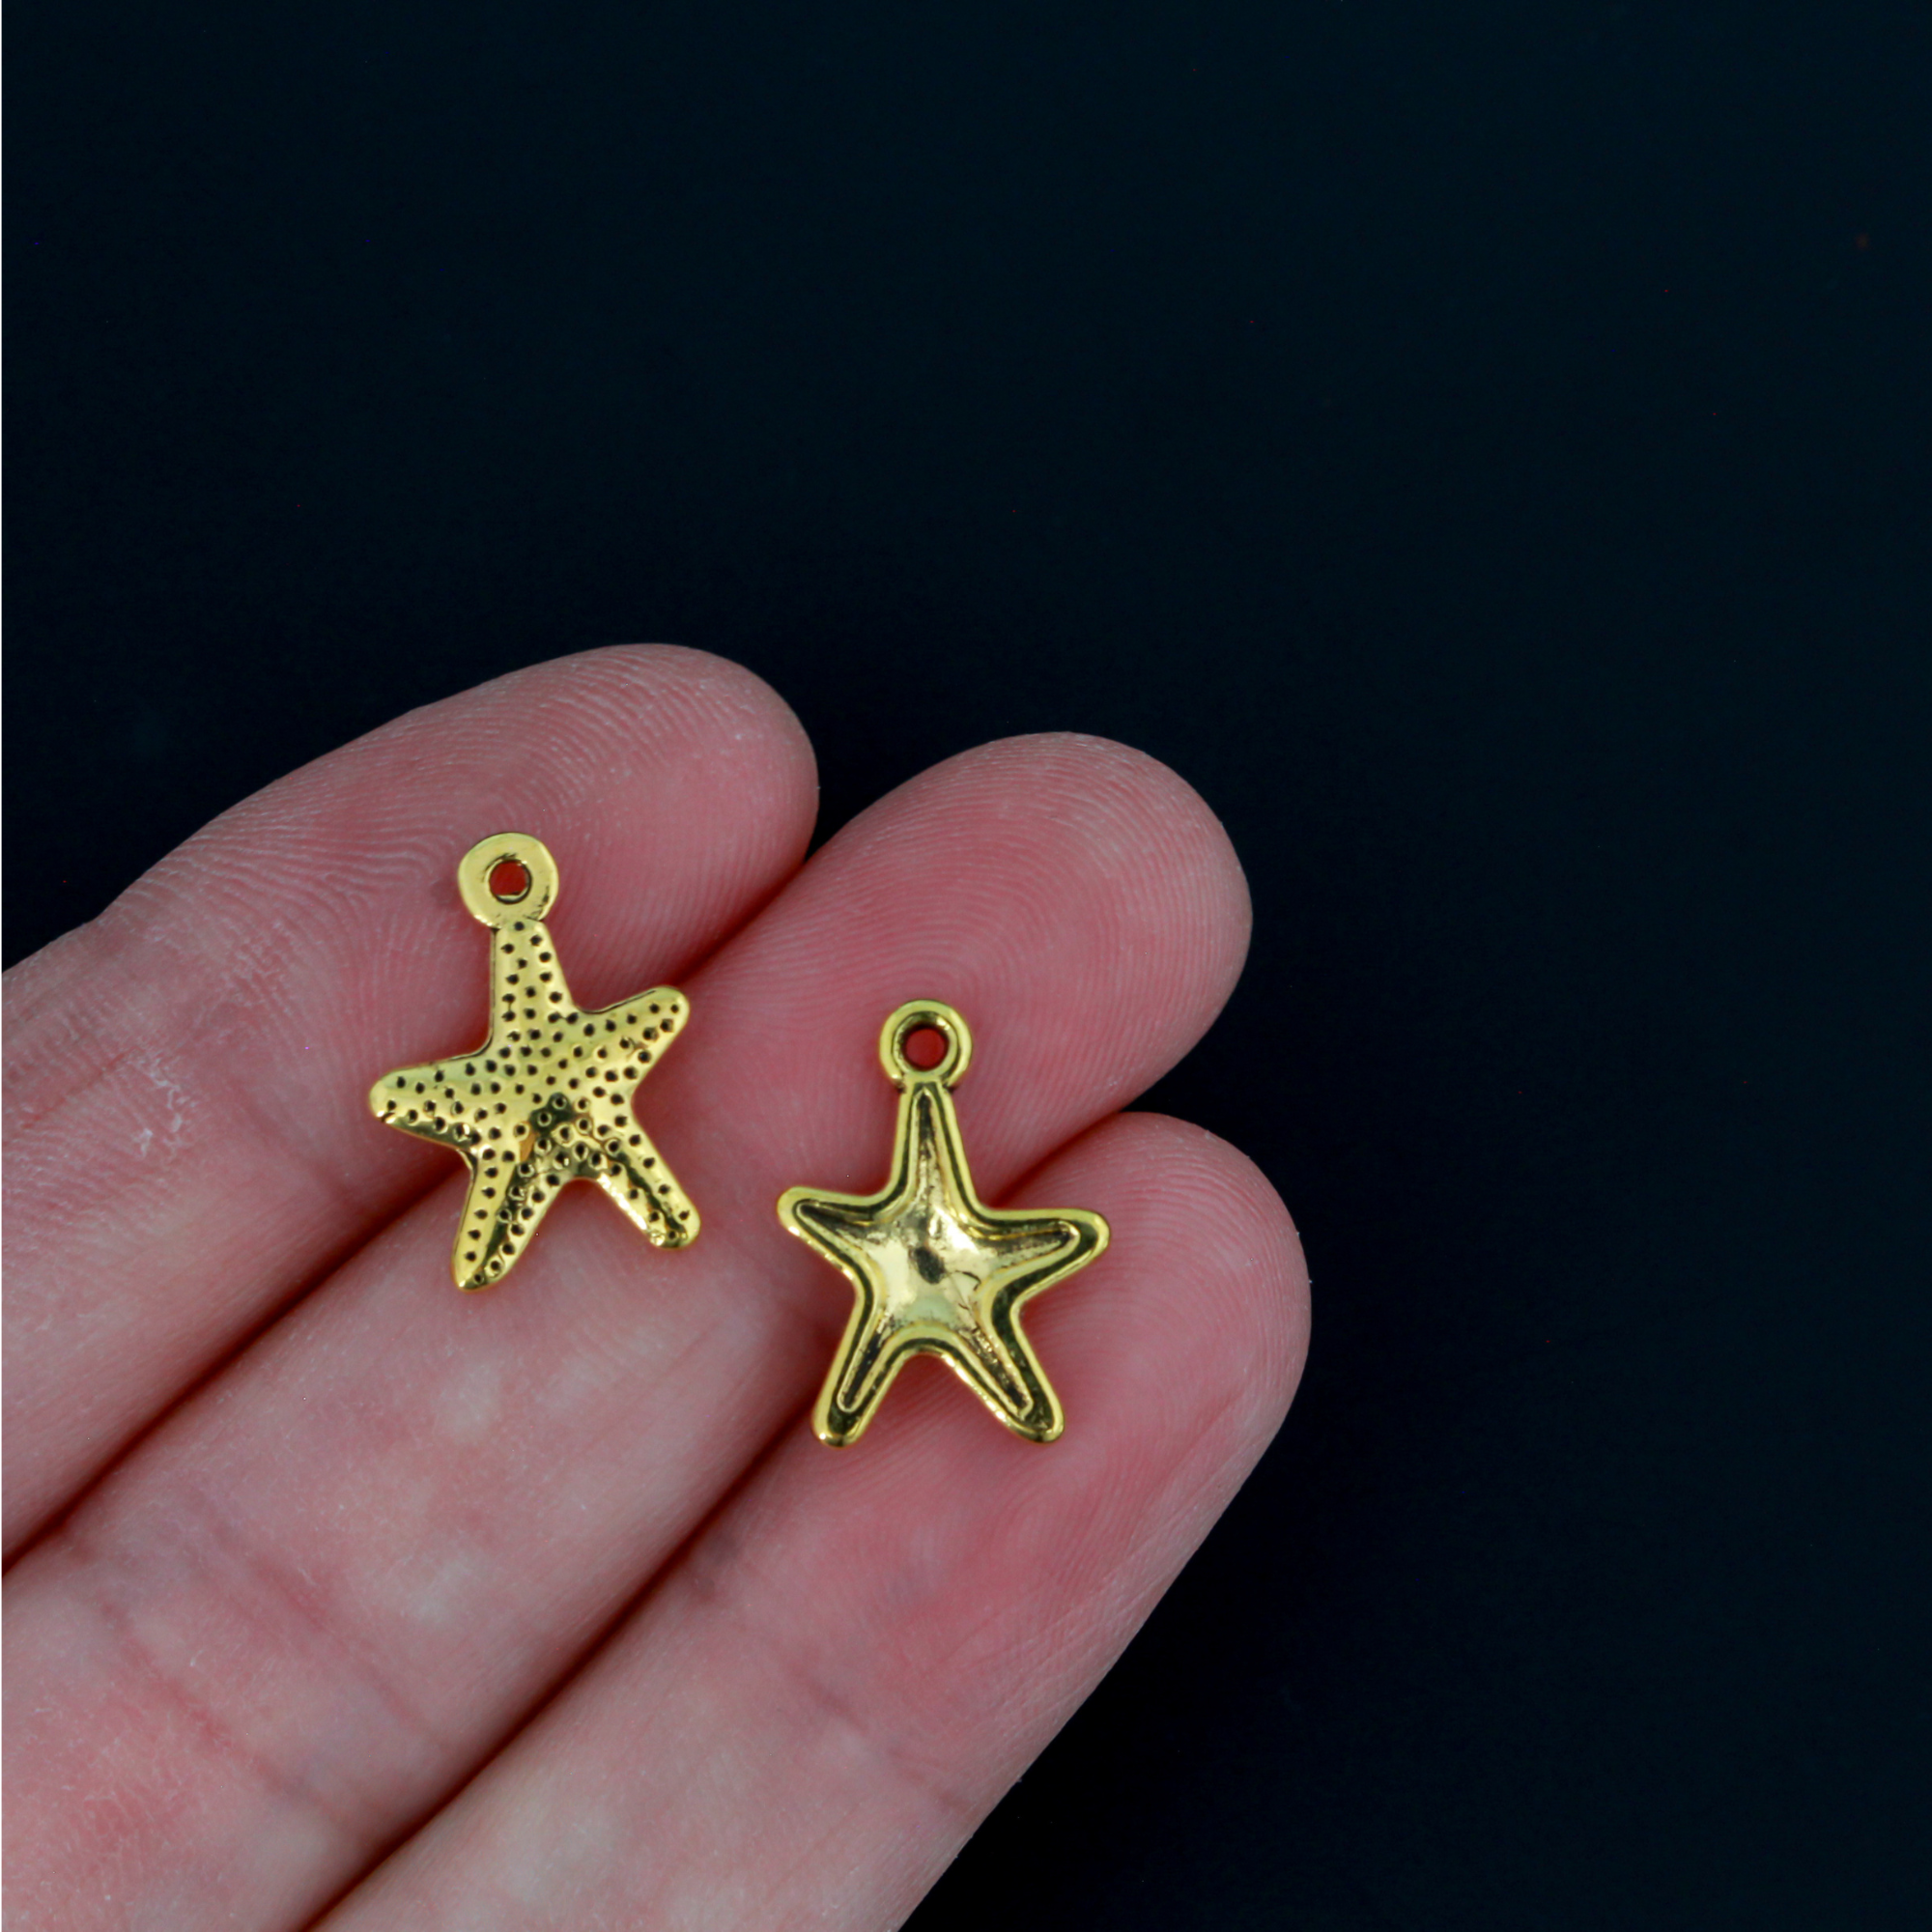 16mm long starfish charms in an antiqued golden color.